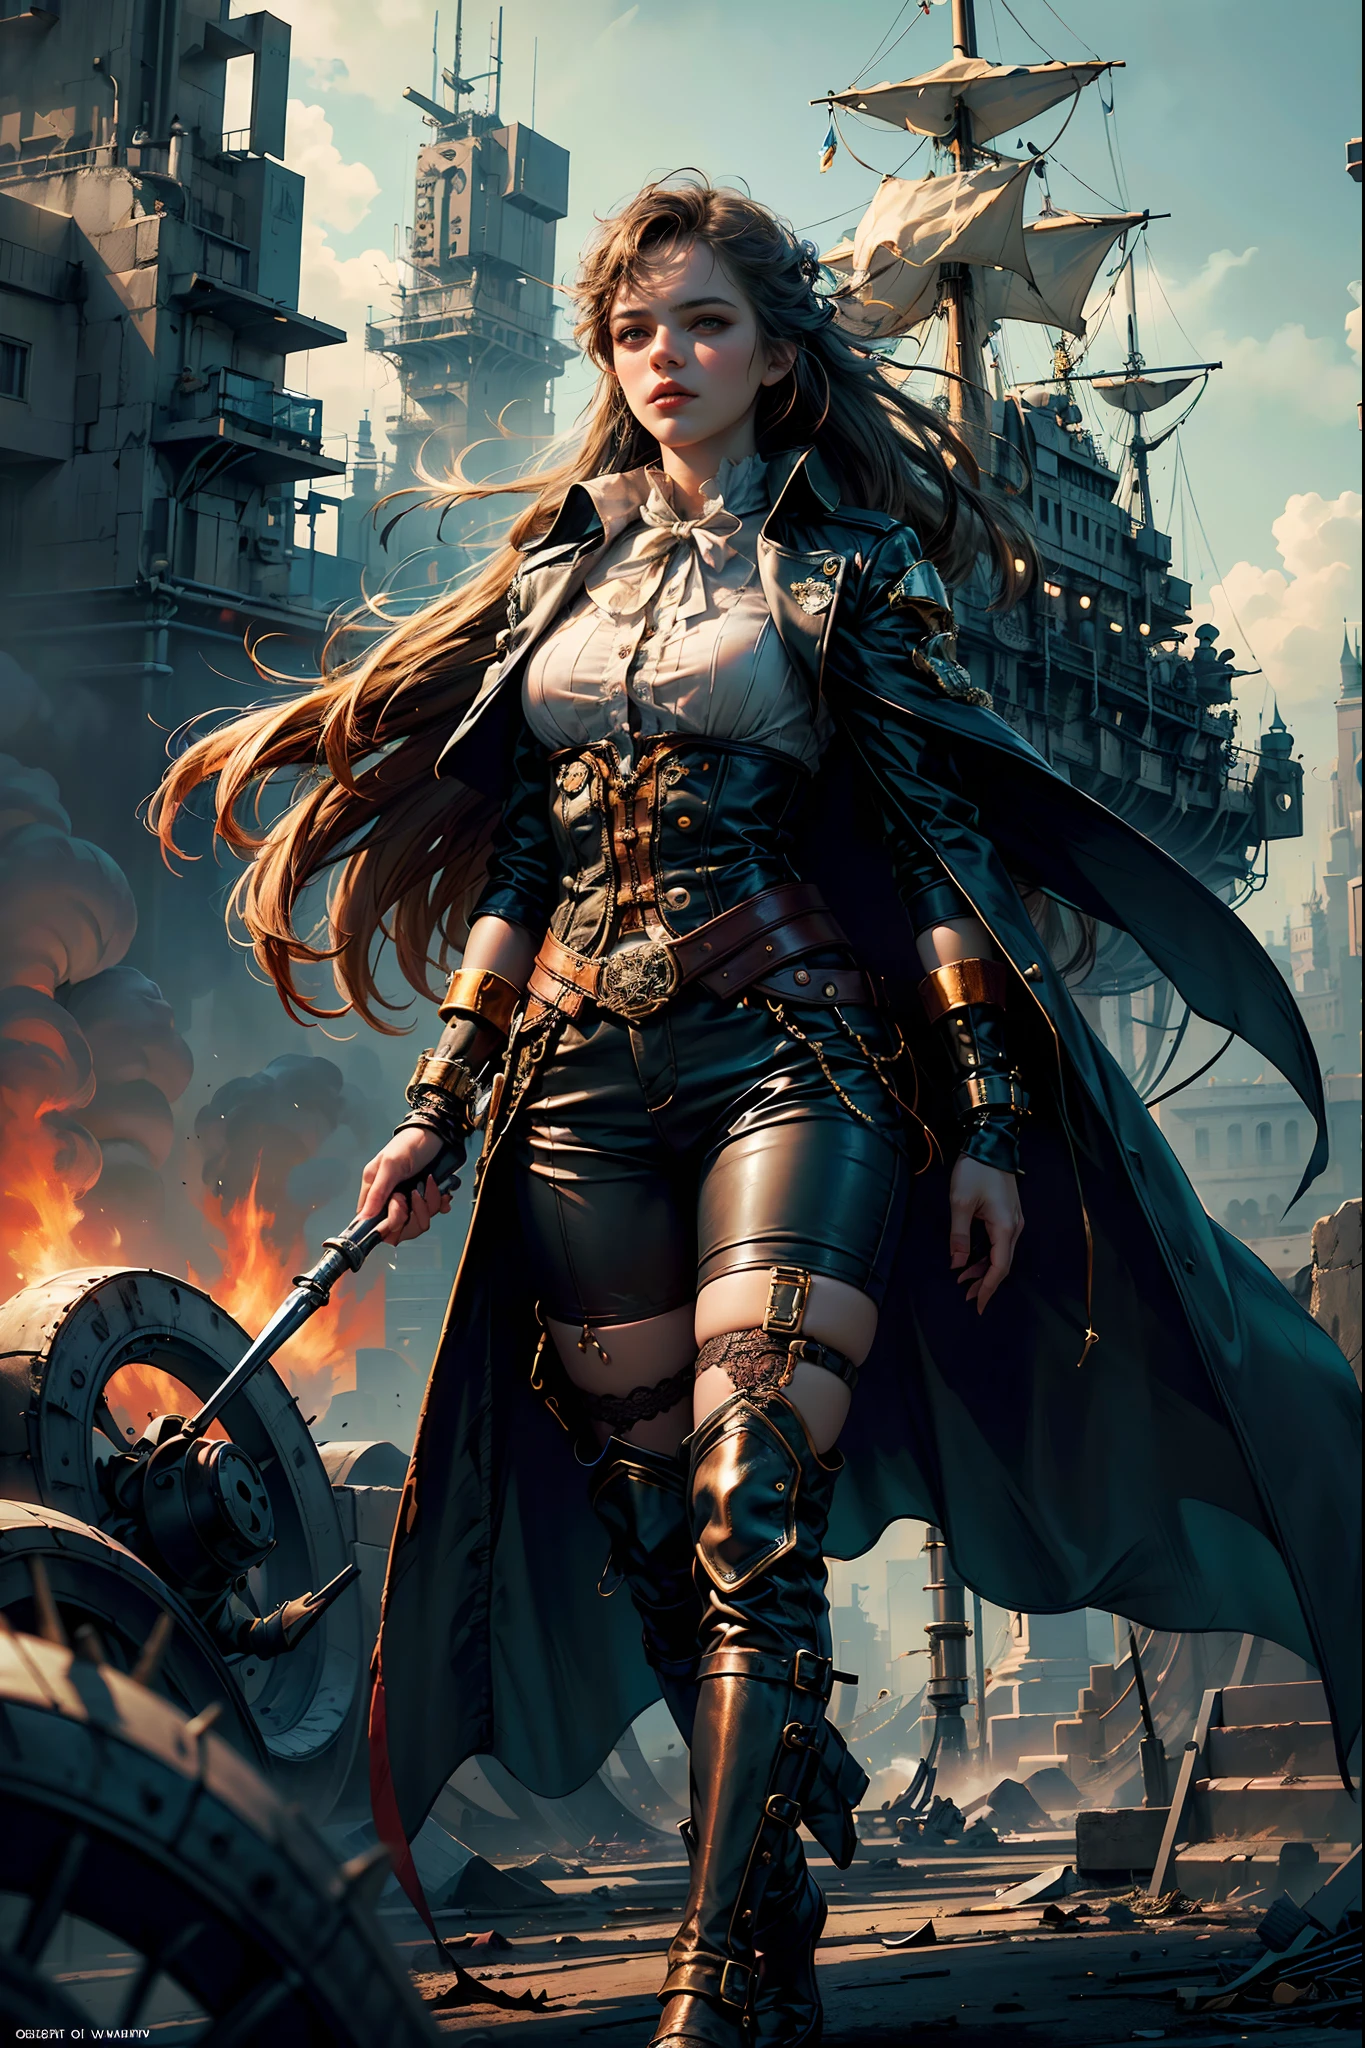 Ultra Resolution, Ultra detail, 8k , HDR, Ultra sharp,((top-quality)), ((​masterpiece)), ((realisitic)), (detailed), Reflective,een Emma Watson,steampunk girl,looking back at the camera,leather shorts,slender and graceful frame,inside pirate ship,helmet with goggles,(best quality,4k,8k,highres,masterpiece:1.2),ultra-detailed,(realistic,photorealistic,photo-realistic:1.37),hdr,UHD,studio lighting,ultra-fine painting,sharp focus,physically-based rendering,extreme detail description,professional,vivid colors,bokeh,portraits,landscape,horror,anime,sci-fi,photography,concept artists,vivid colors,bokeh,sepia tone,warm lighting,Full Body, steampunk fantasy style, steampunk girl, steampunk inventor girl, sci-fi steampunk, dieselpunk art style, steampunk pin-up girl, digital steampunk art, steam punk style, steam-punk, young girl in steampunk clothes, steampunk digital art, high quality steampunk art, steampunk